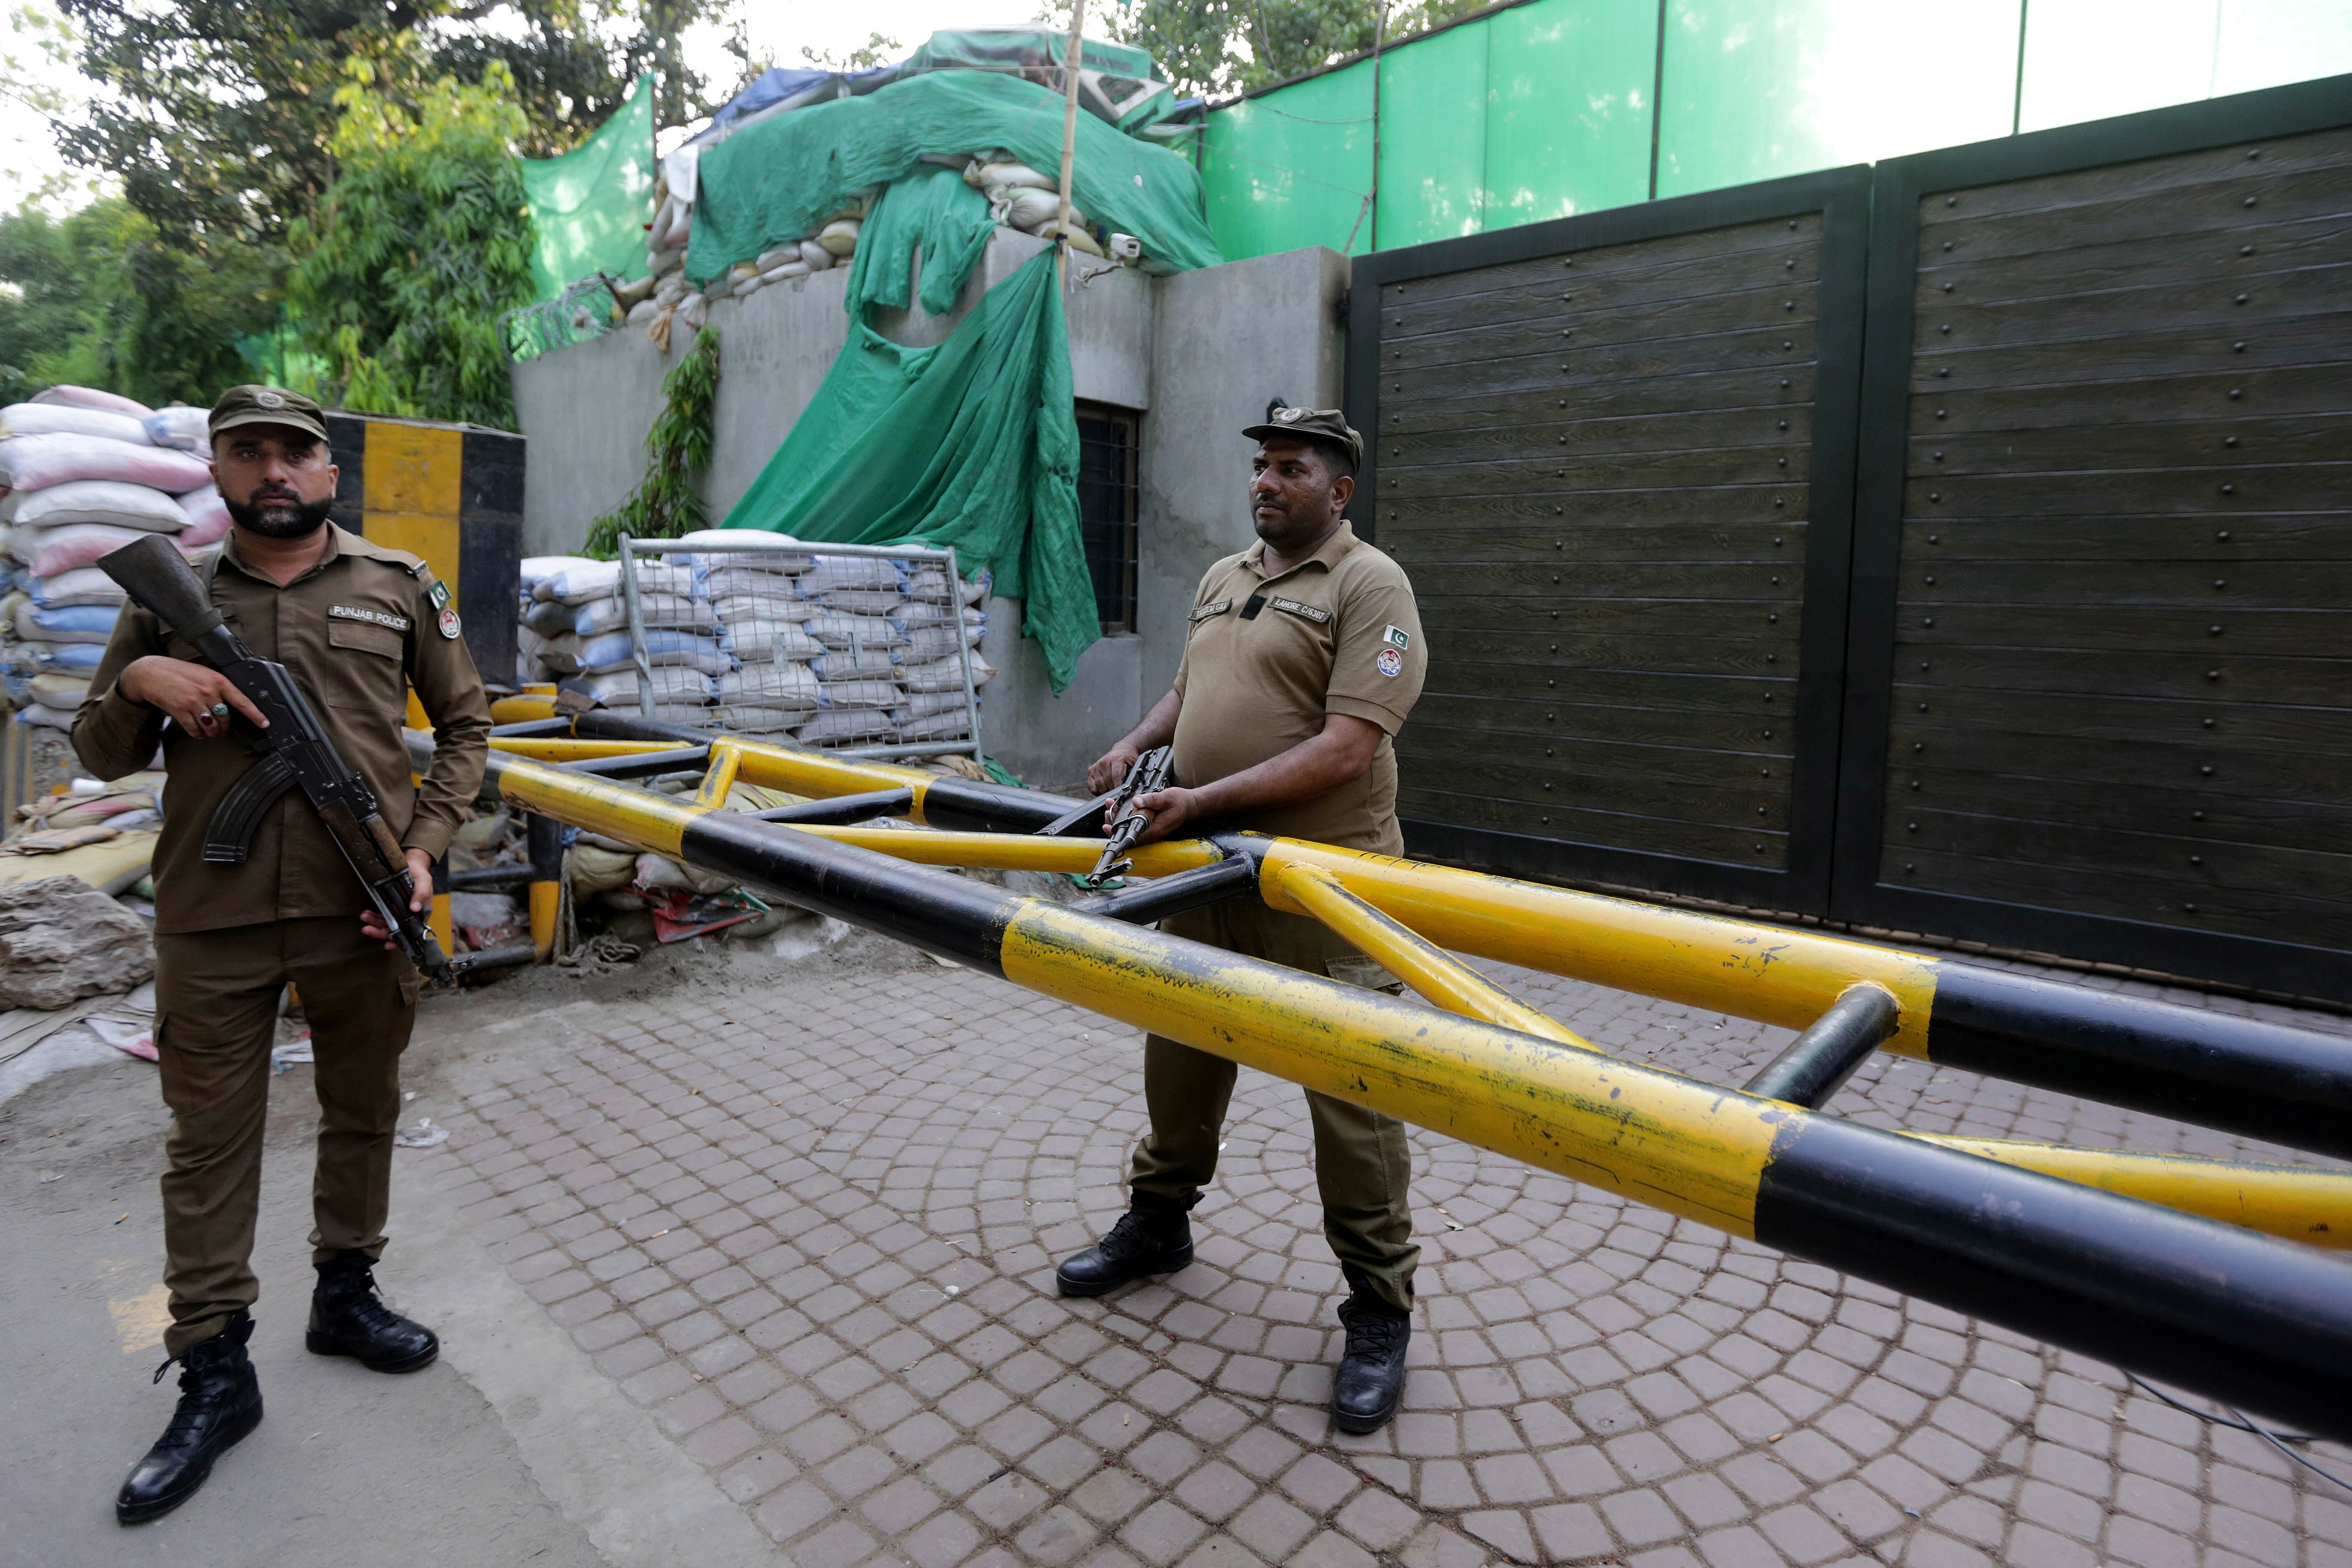 Pakistani security officials stand guard as Lahore Commissioner Muhammad Ali Randhawa searches the residence of former Pakistani Prime Minister Imran Khan at Zaman Park on 19 May